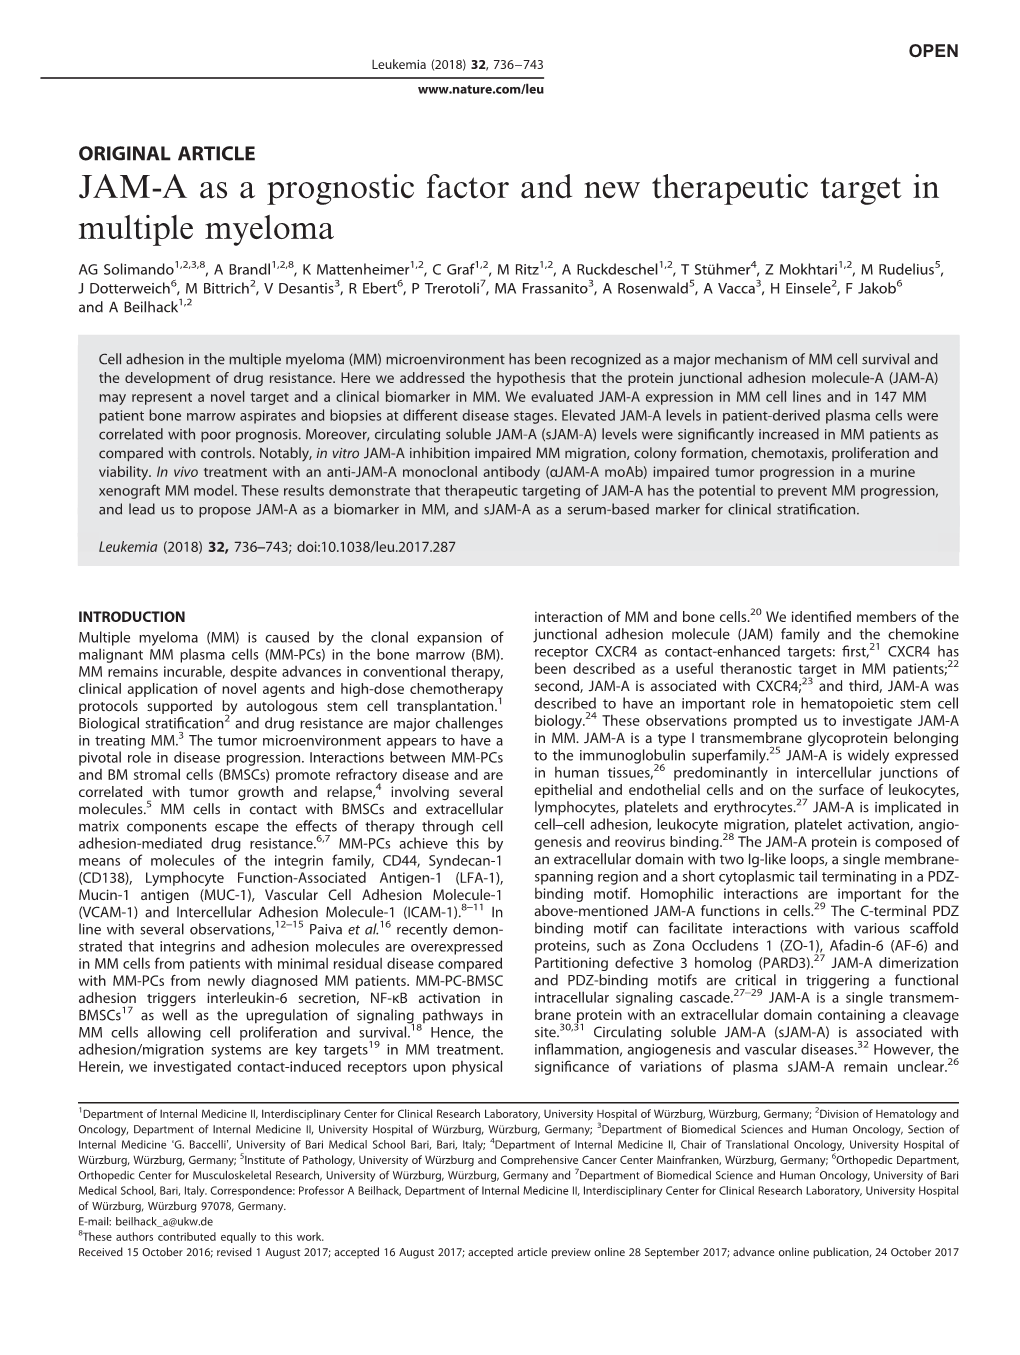 JAM-A As a Prognostic Factor and New Therapeutic Target in Multiple Myeloma